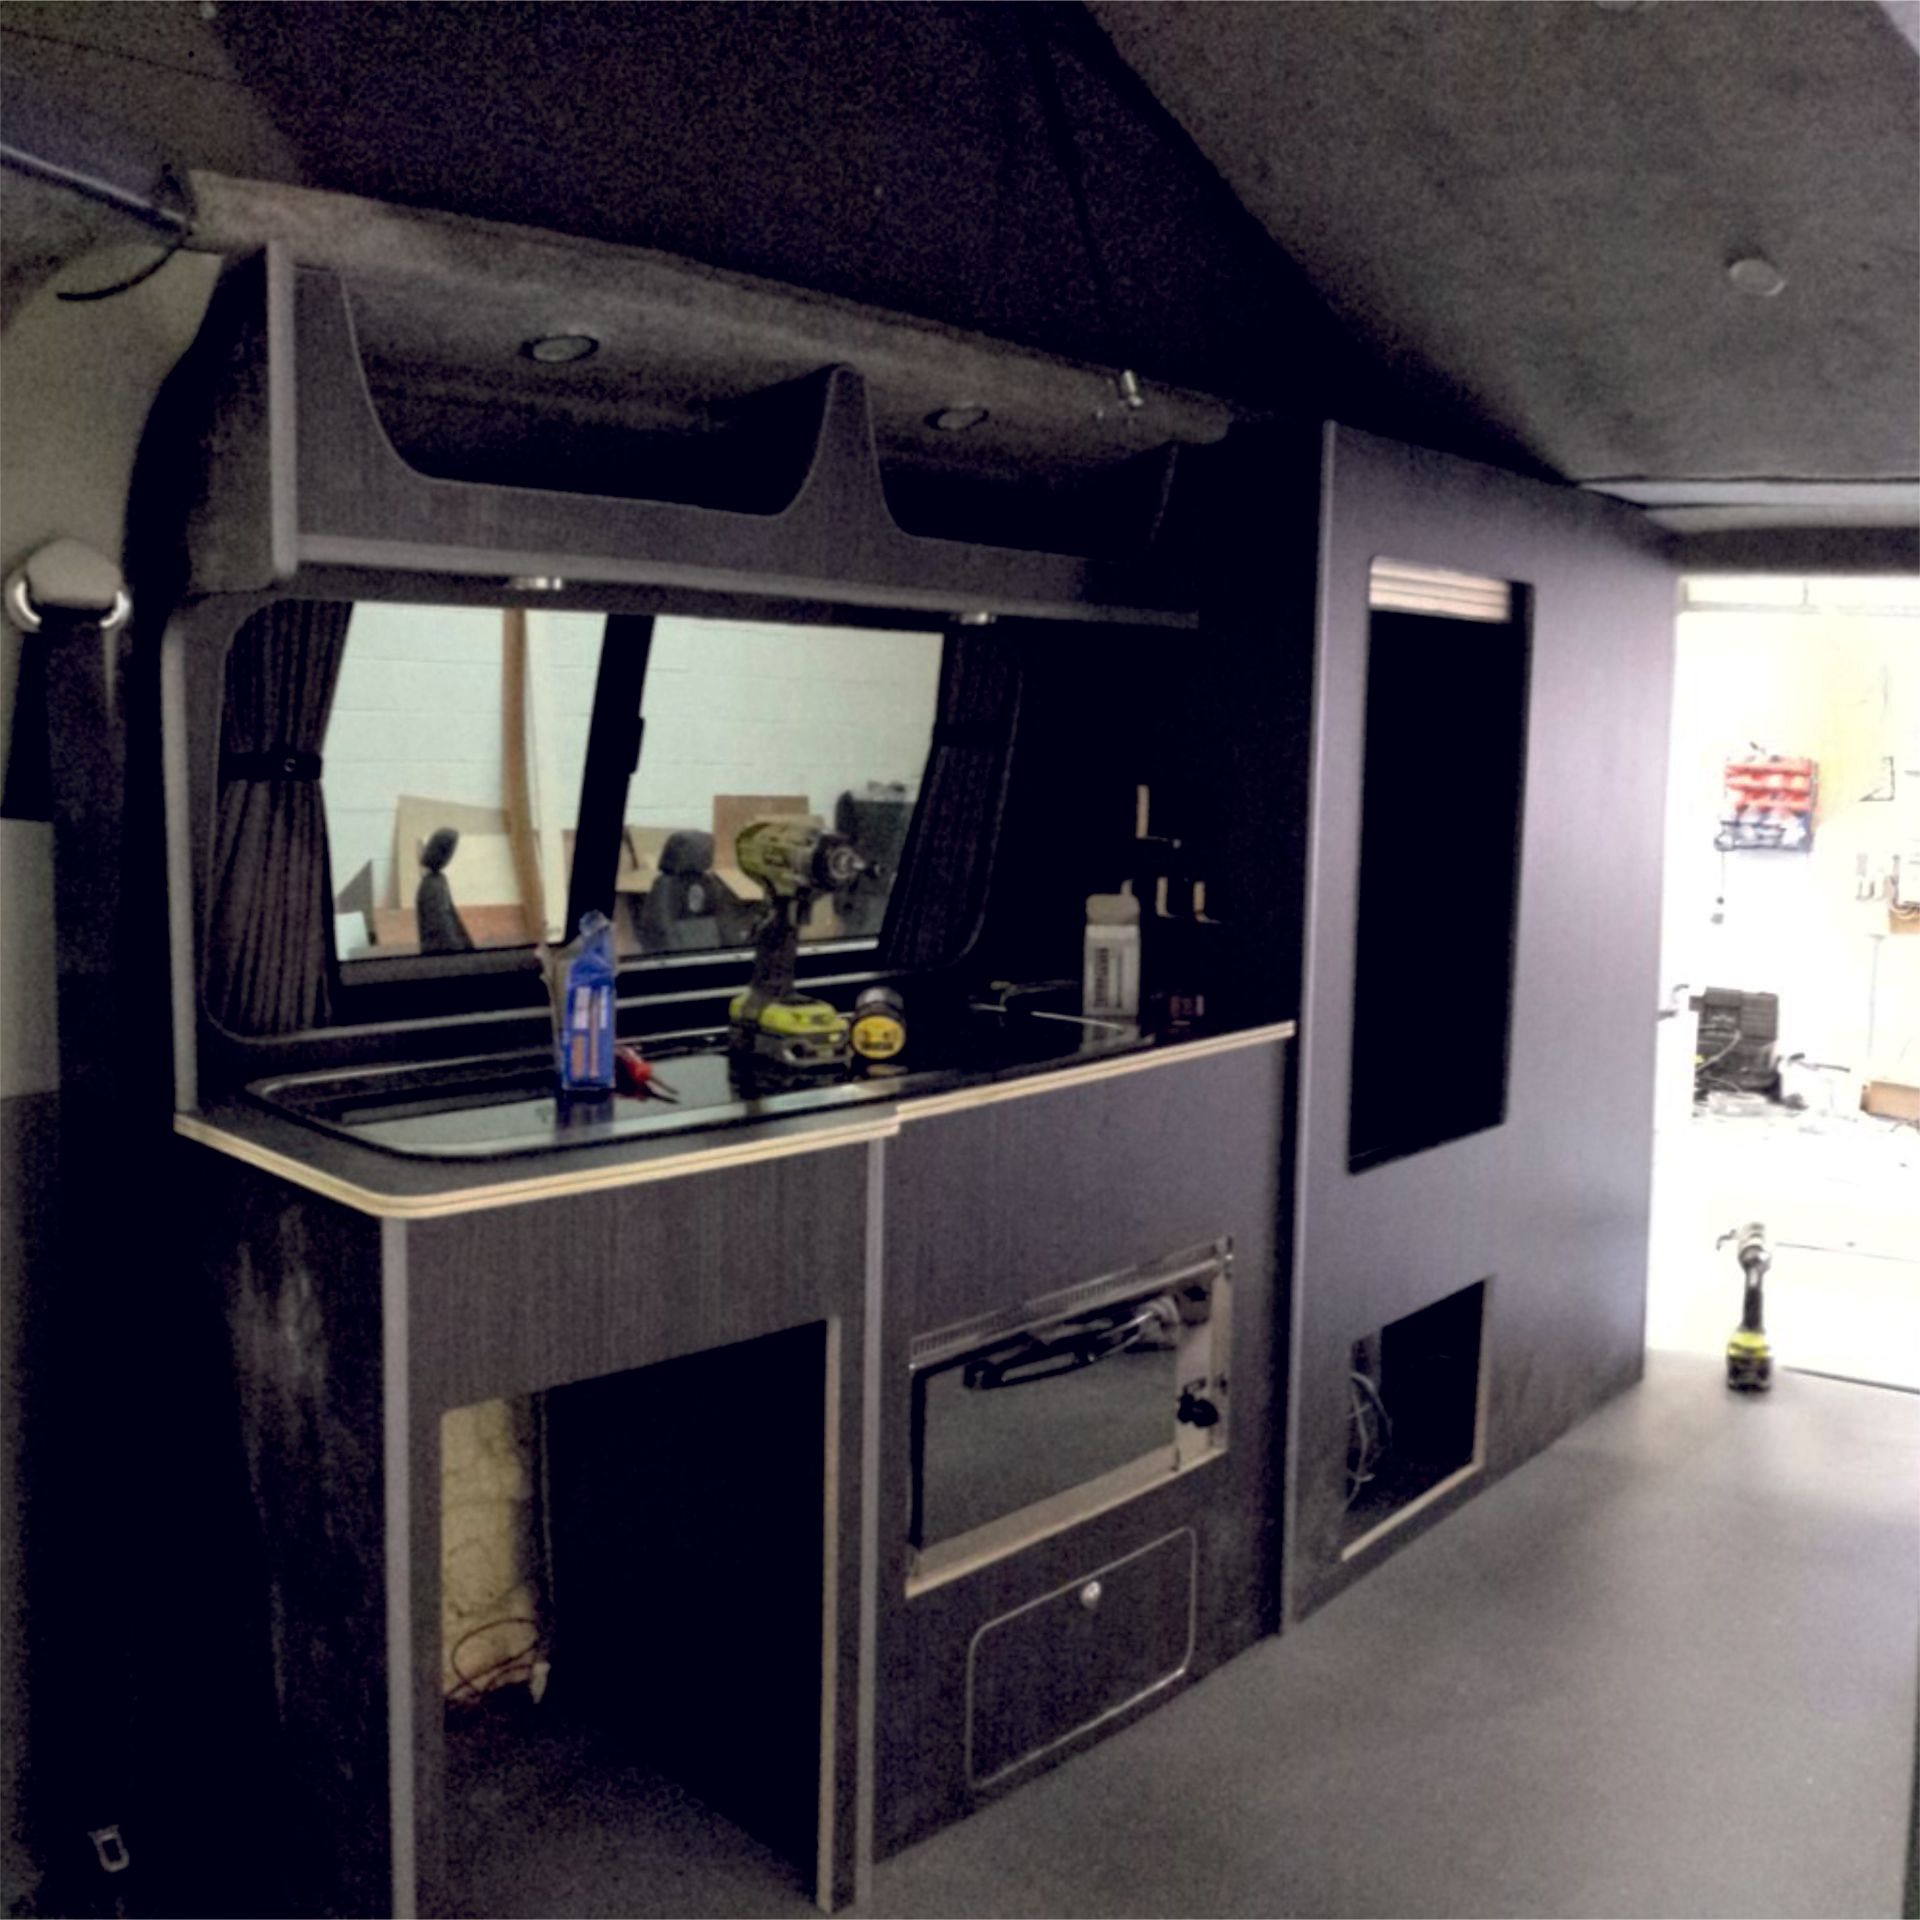 interior units installed in the back of a van